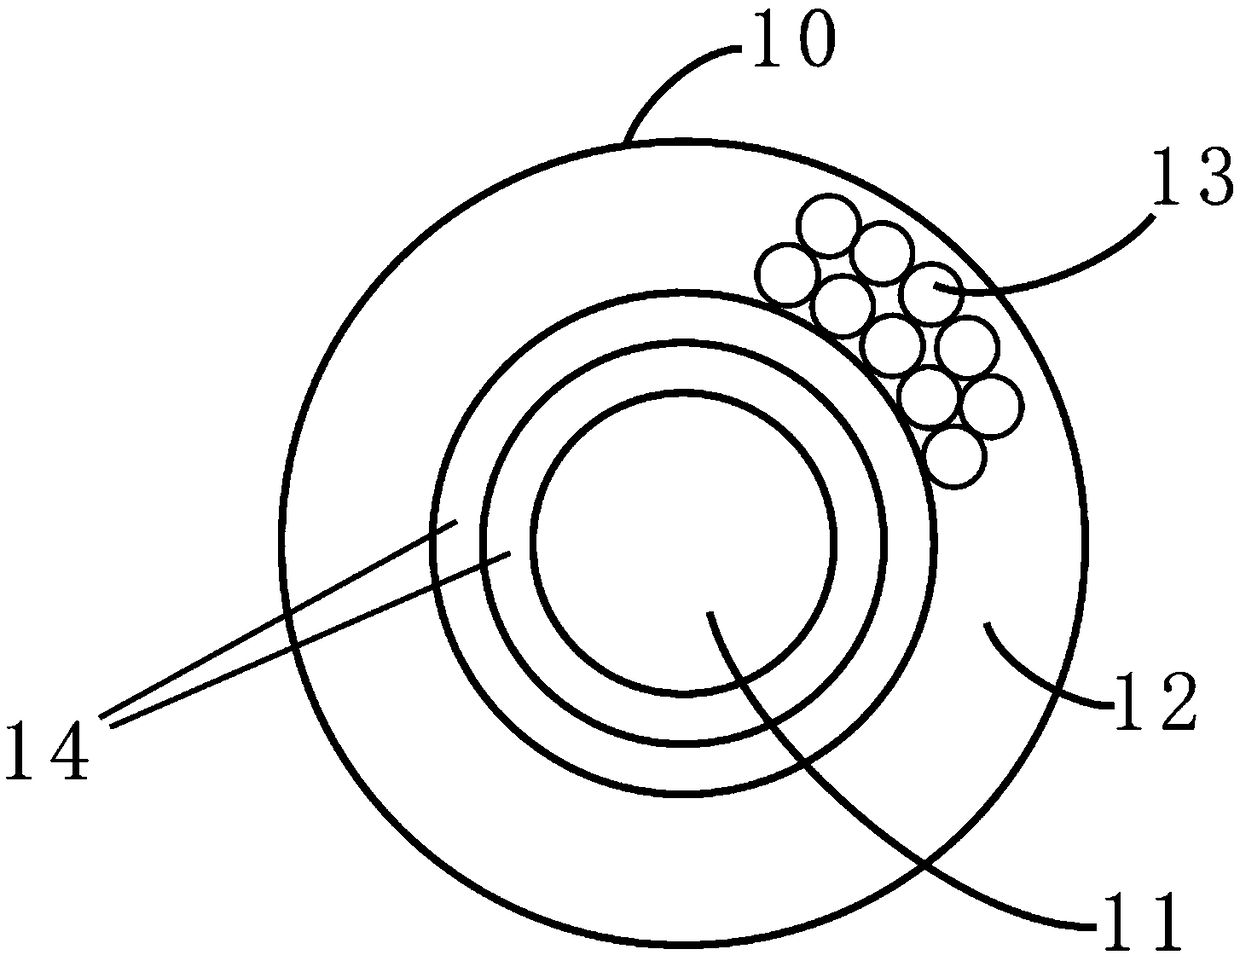 Vision control lens based on peripheral micro-lens, and glasses